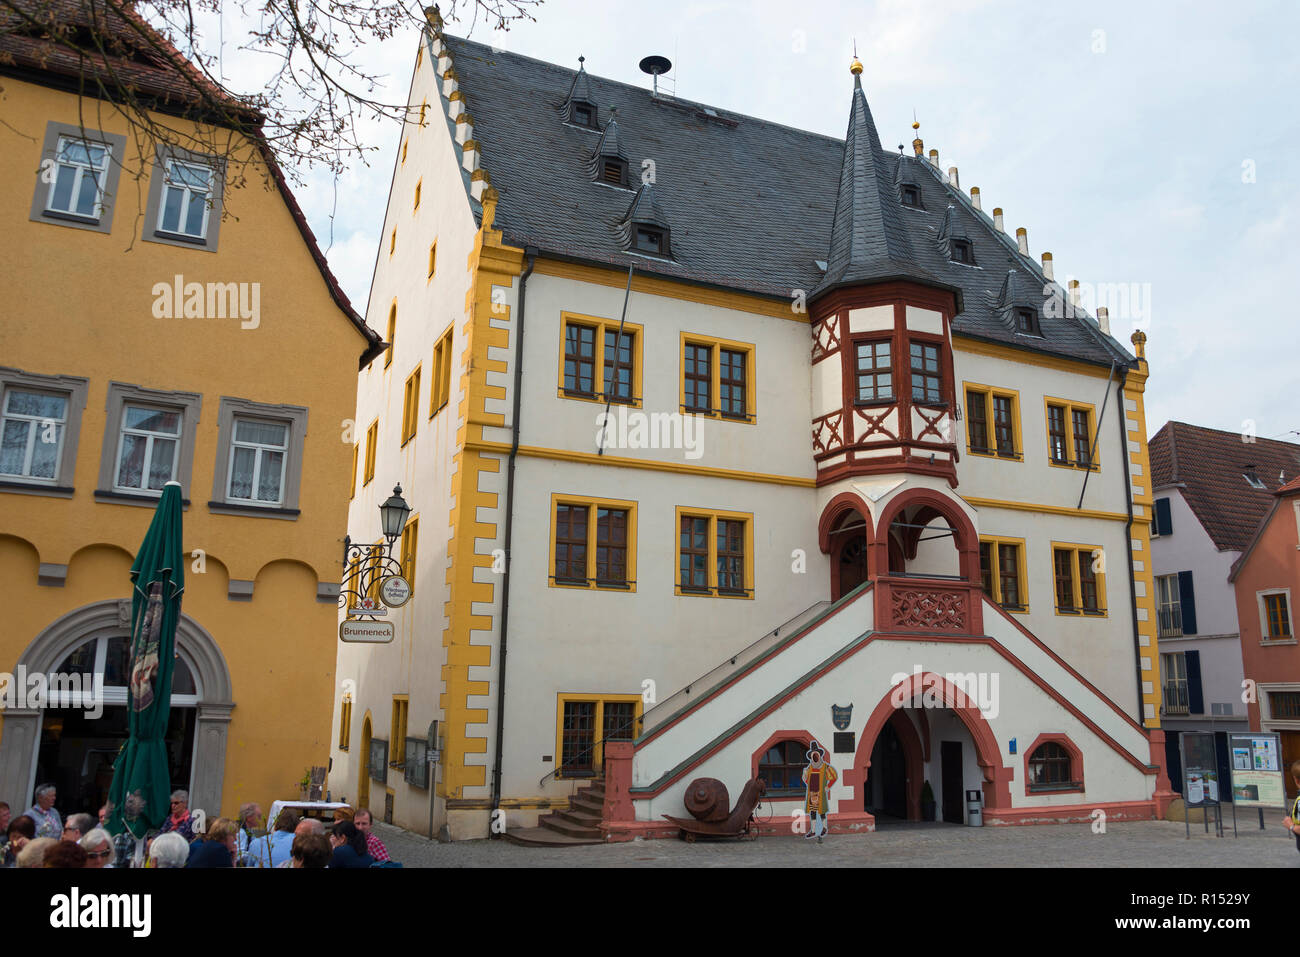 Town hall, market place, Volkach, Lower Franconia, Bavaria, Germany Stock Photo